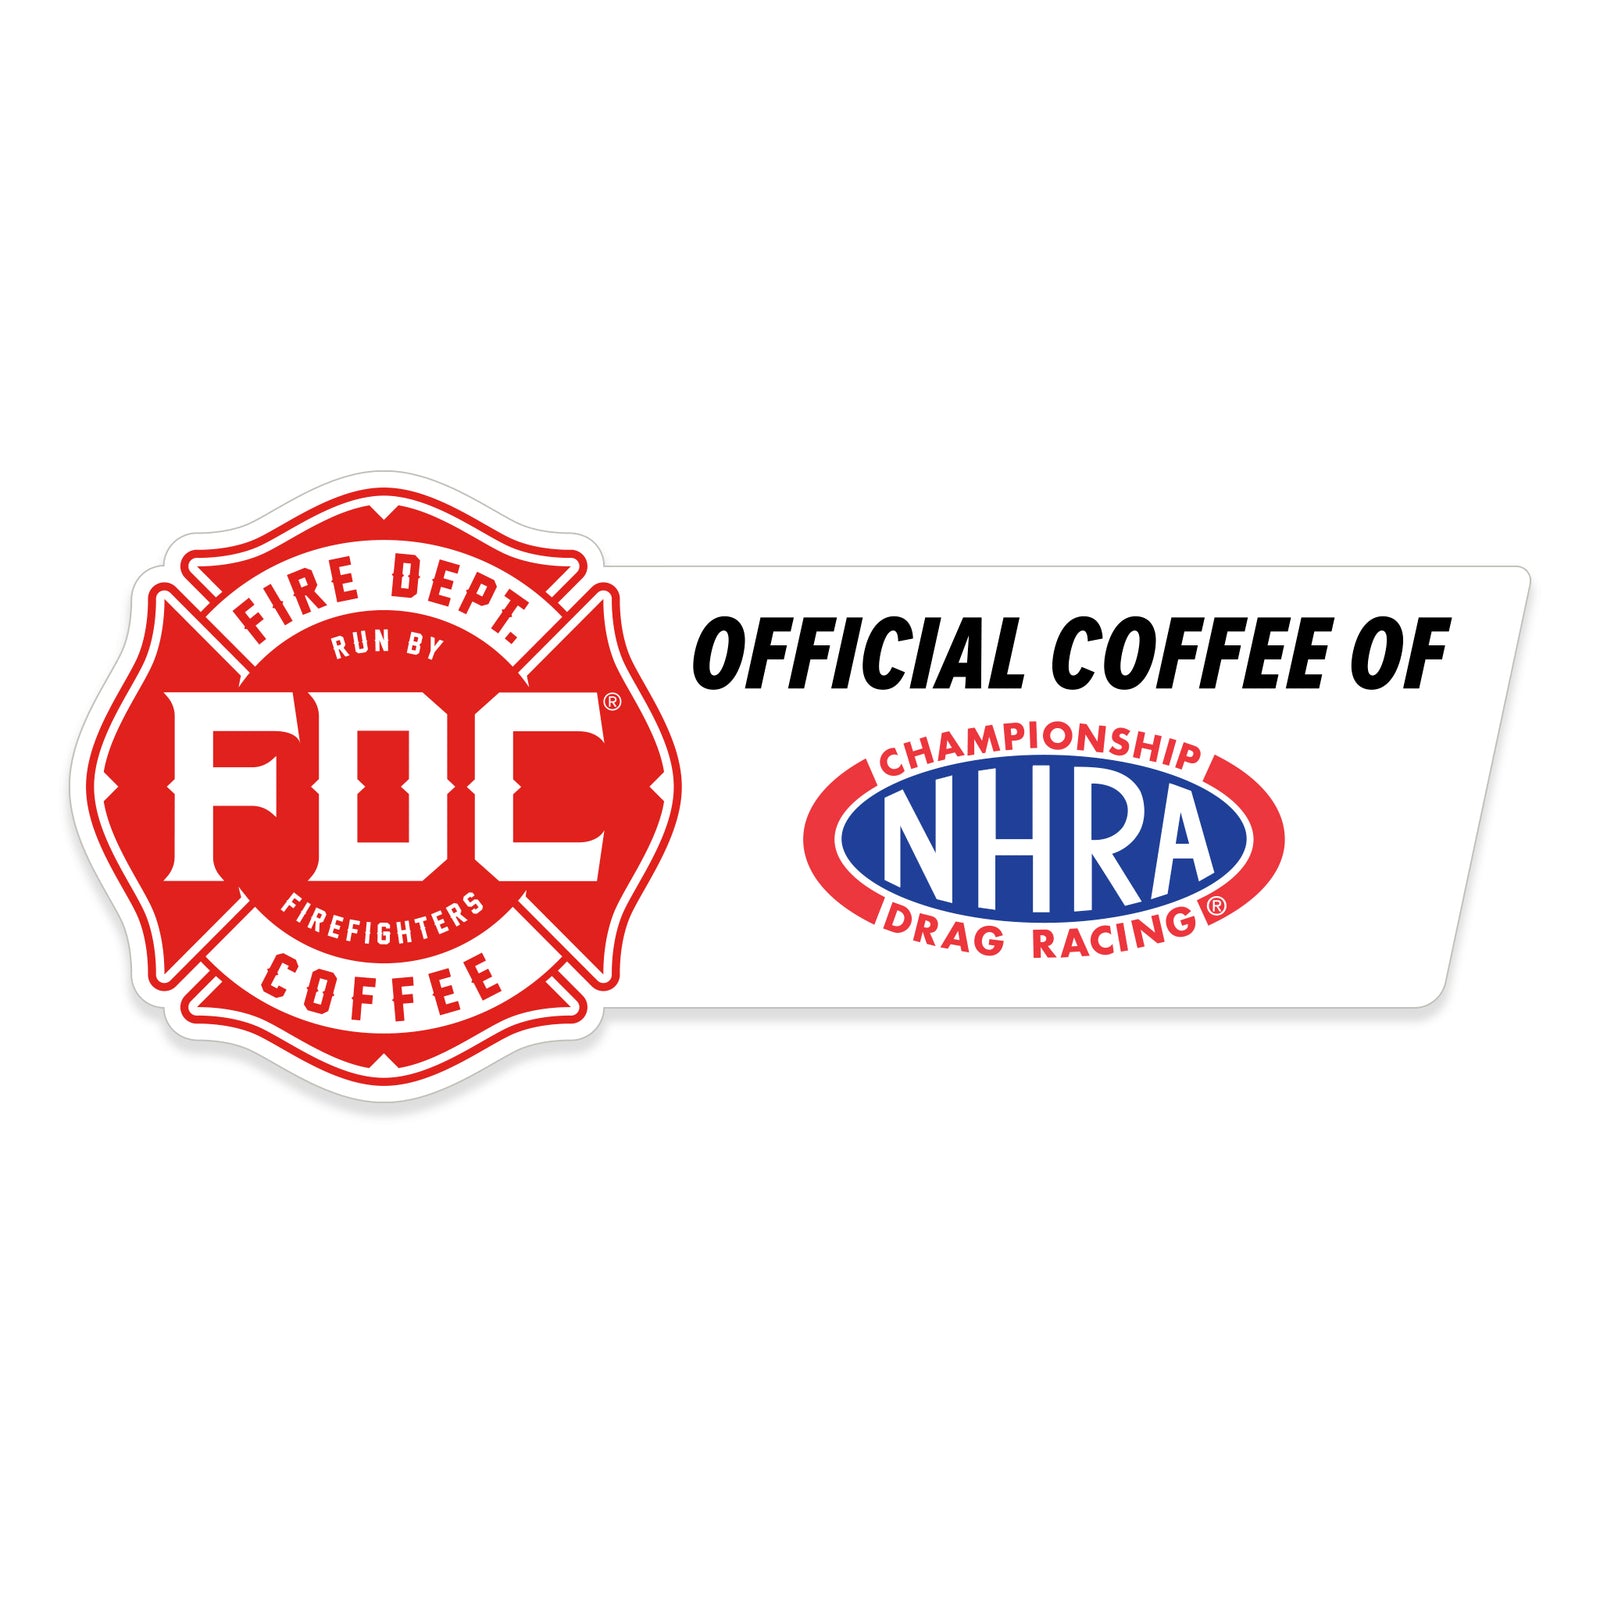 Fire Department Coffee's maltese cross logo with text next to it that reads OFFICIAL COFFEE OF NHRA CHAMPIONSHIP DRAG RACING